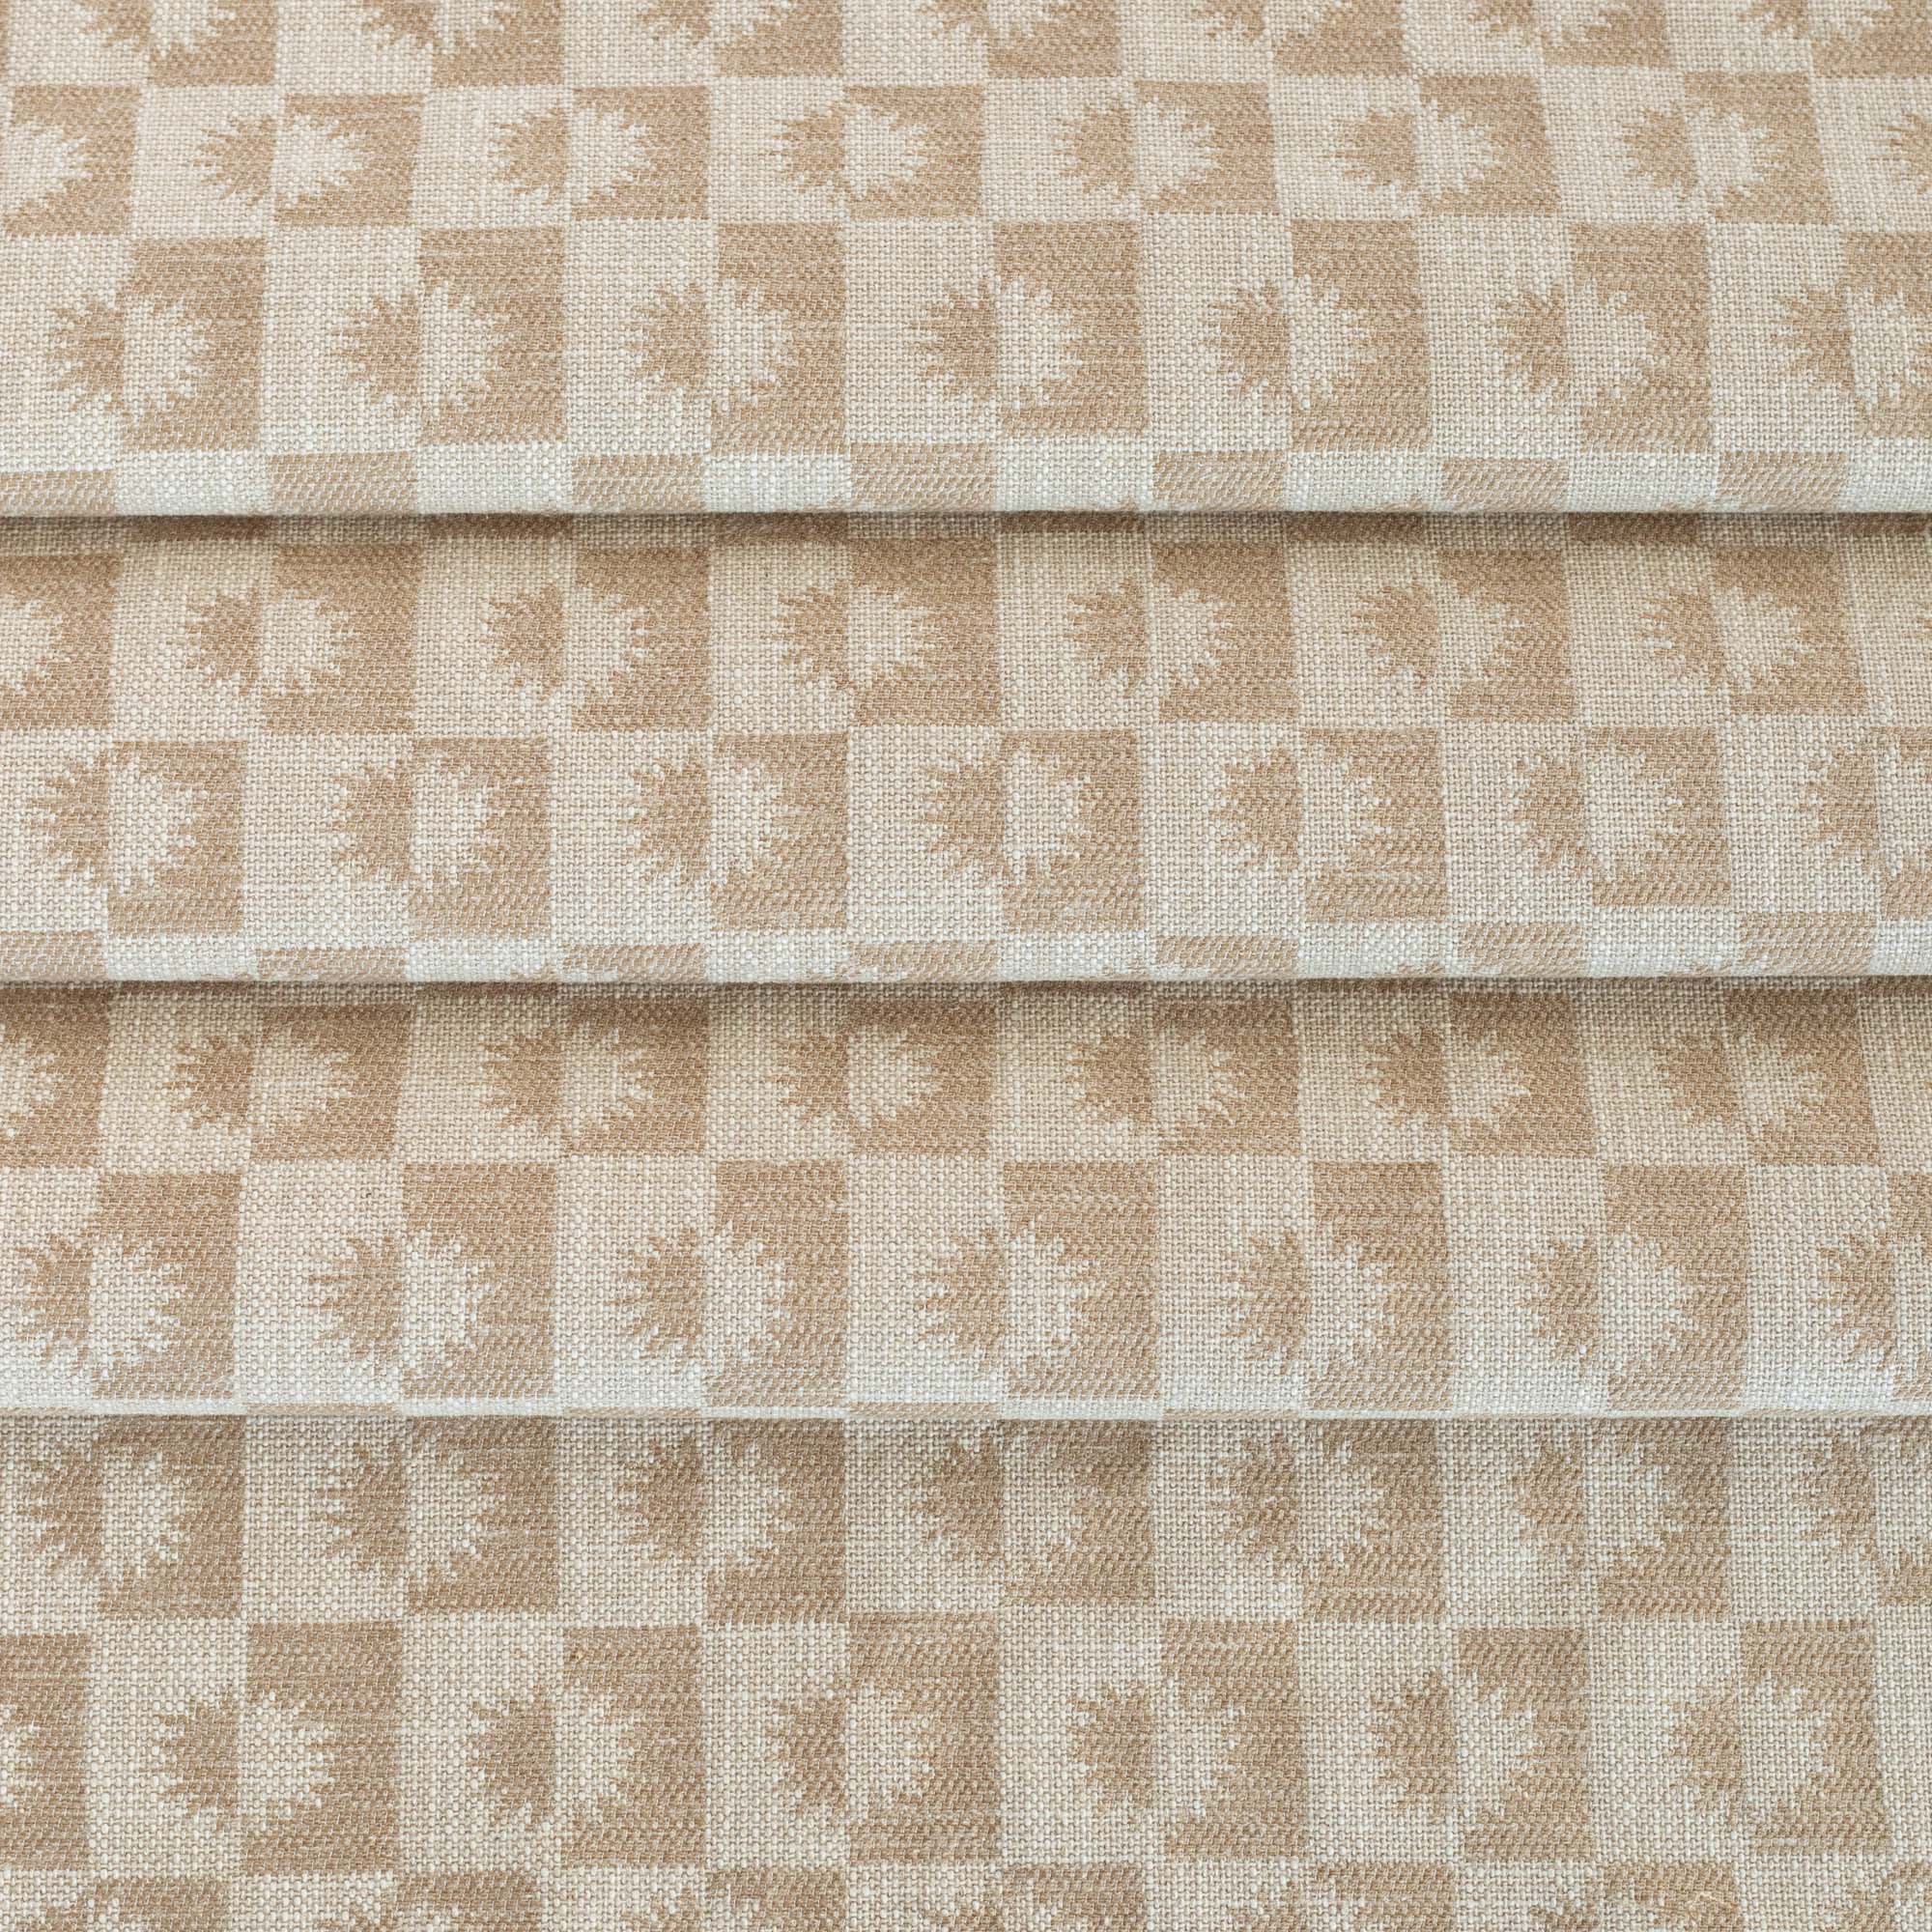 a cream and beige brown checkboard, sun motif patterned home decor  upholstery fabric from Tonic Living 